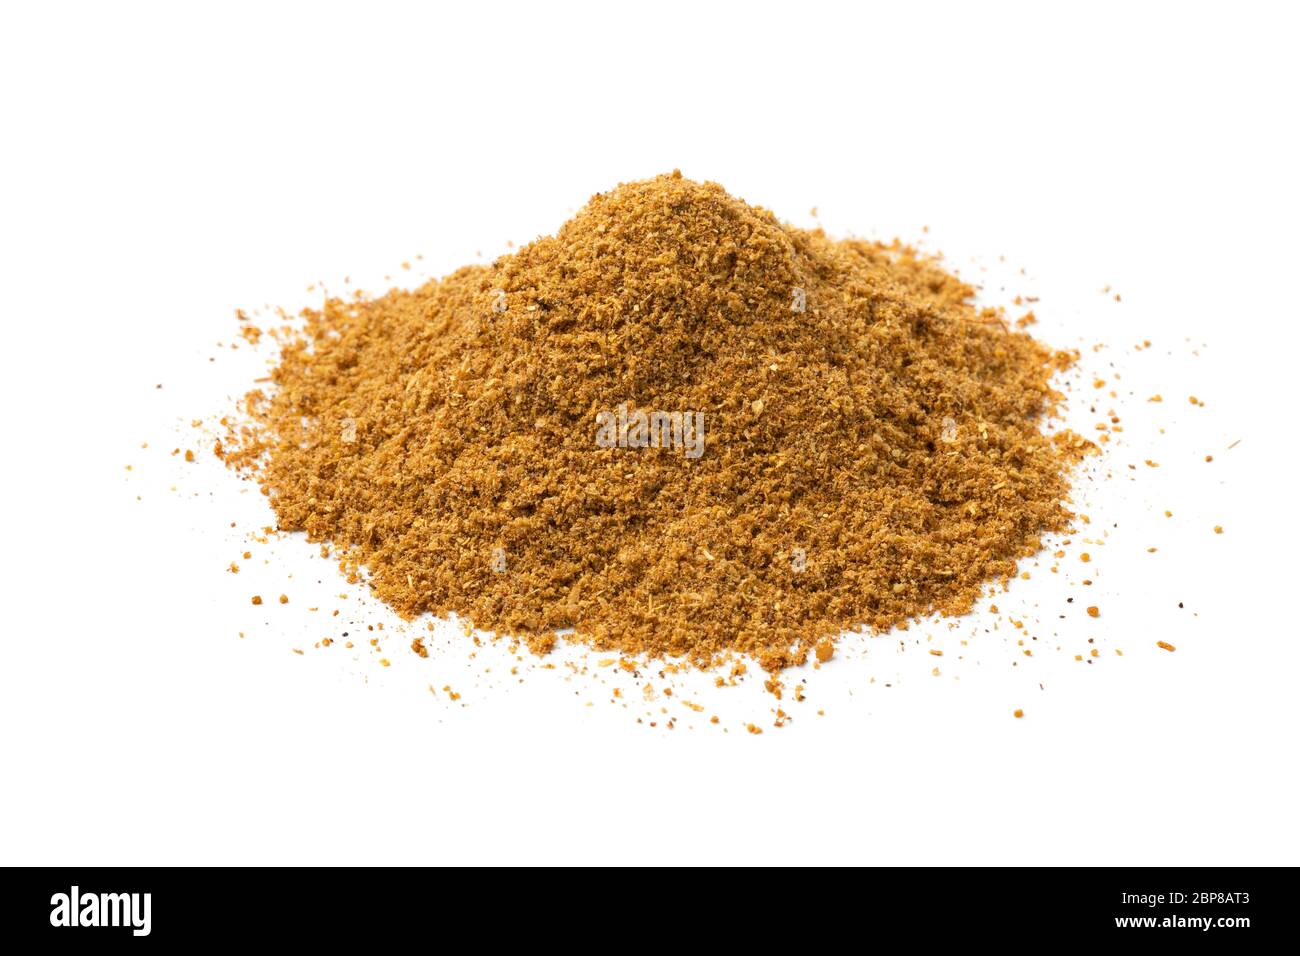 Heap of traditional Indian masala powder close up isolated on white background Stock Photo